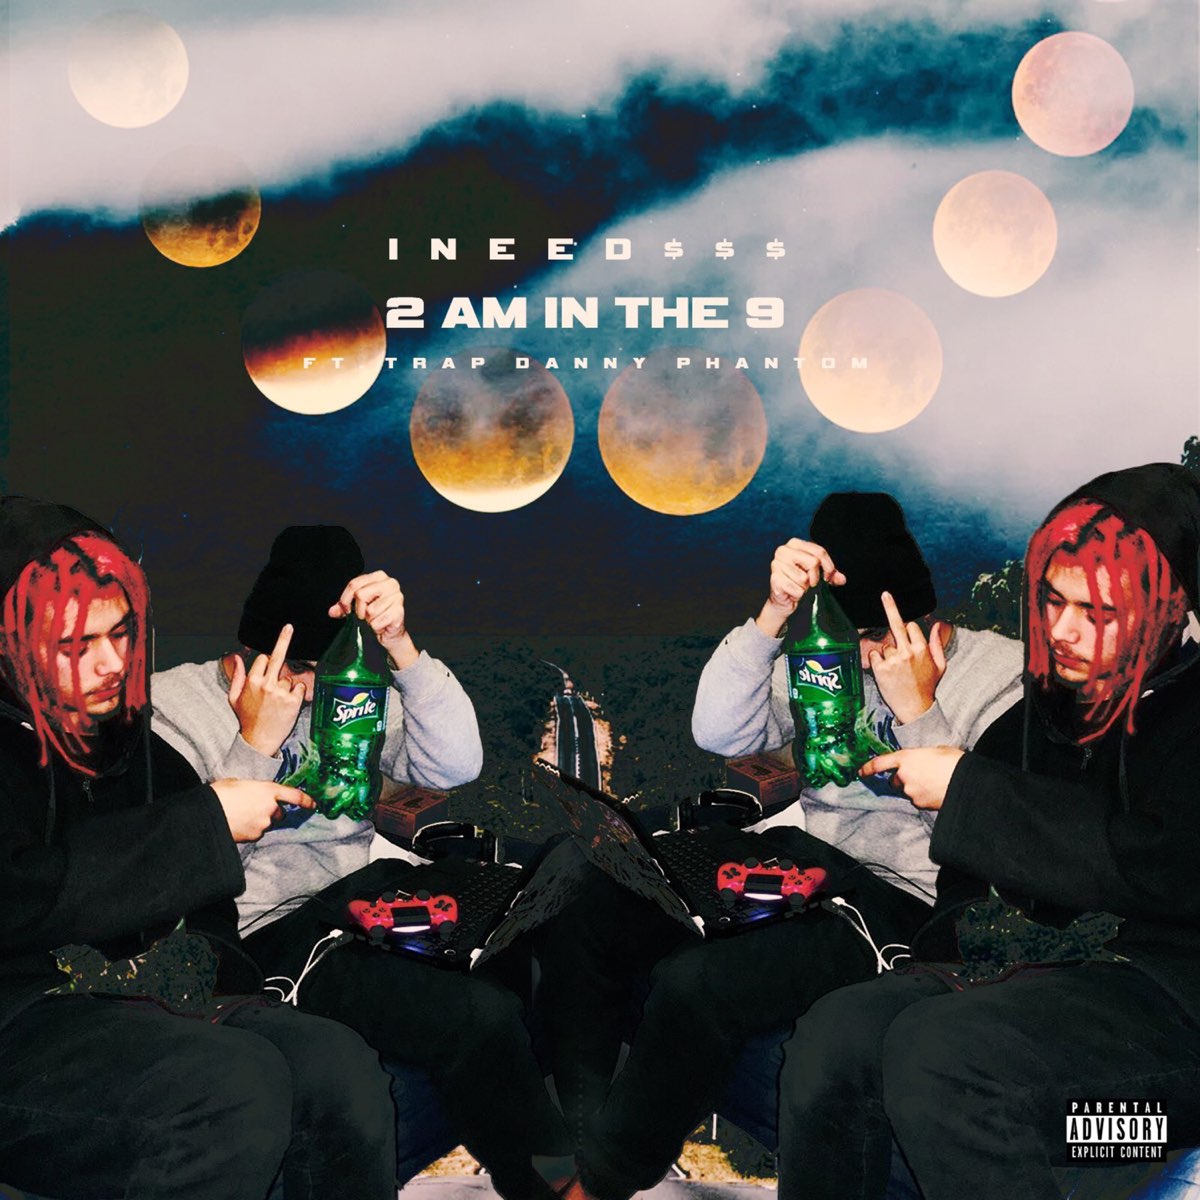 ‎2 AM in the 9 (feat. Trap Danny Phantom) - Single by Ineed$$ on Apple ...